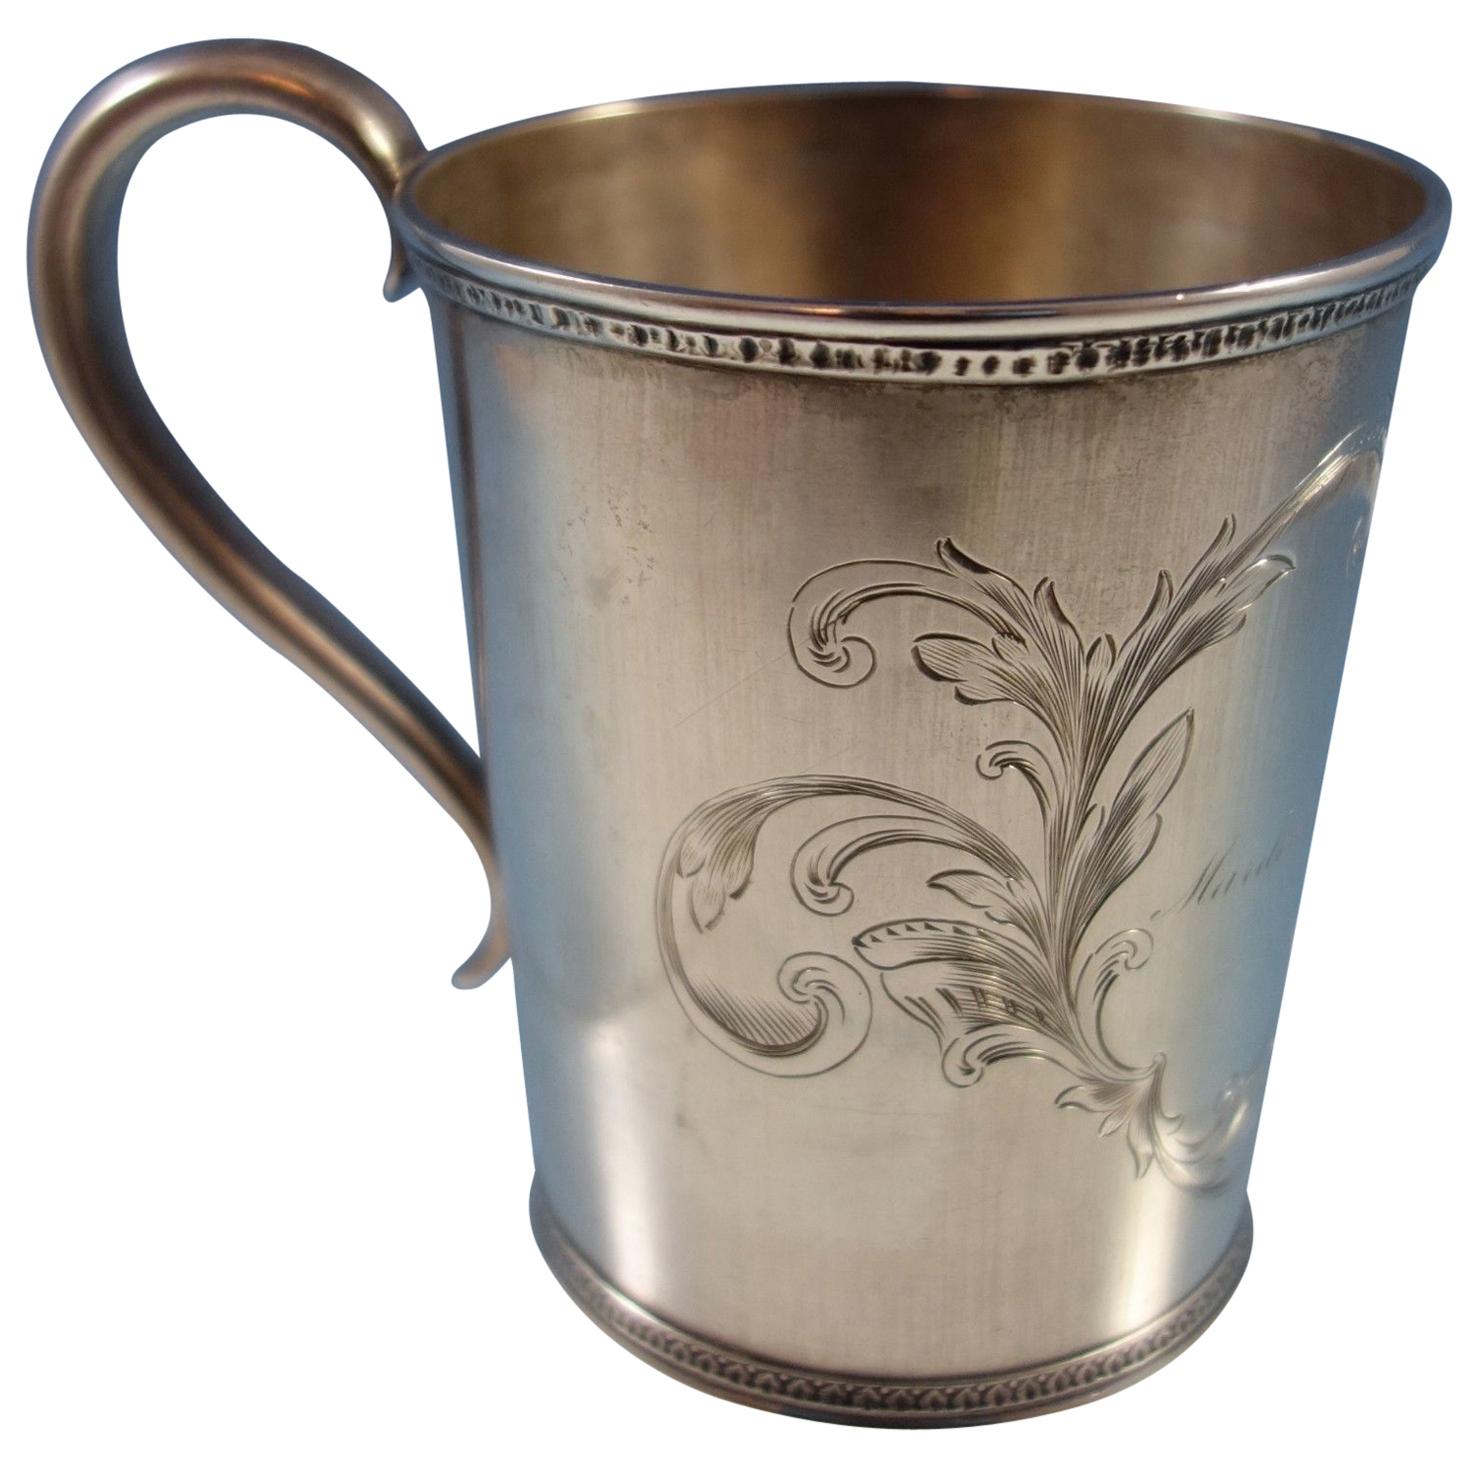 Tifft & Whiting Coin Silver Baby Cup with Engraved Scrollwork